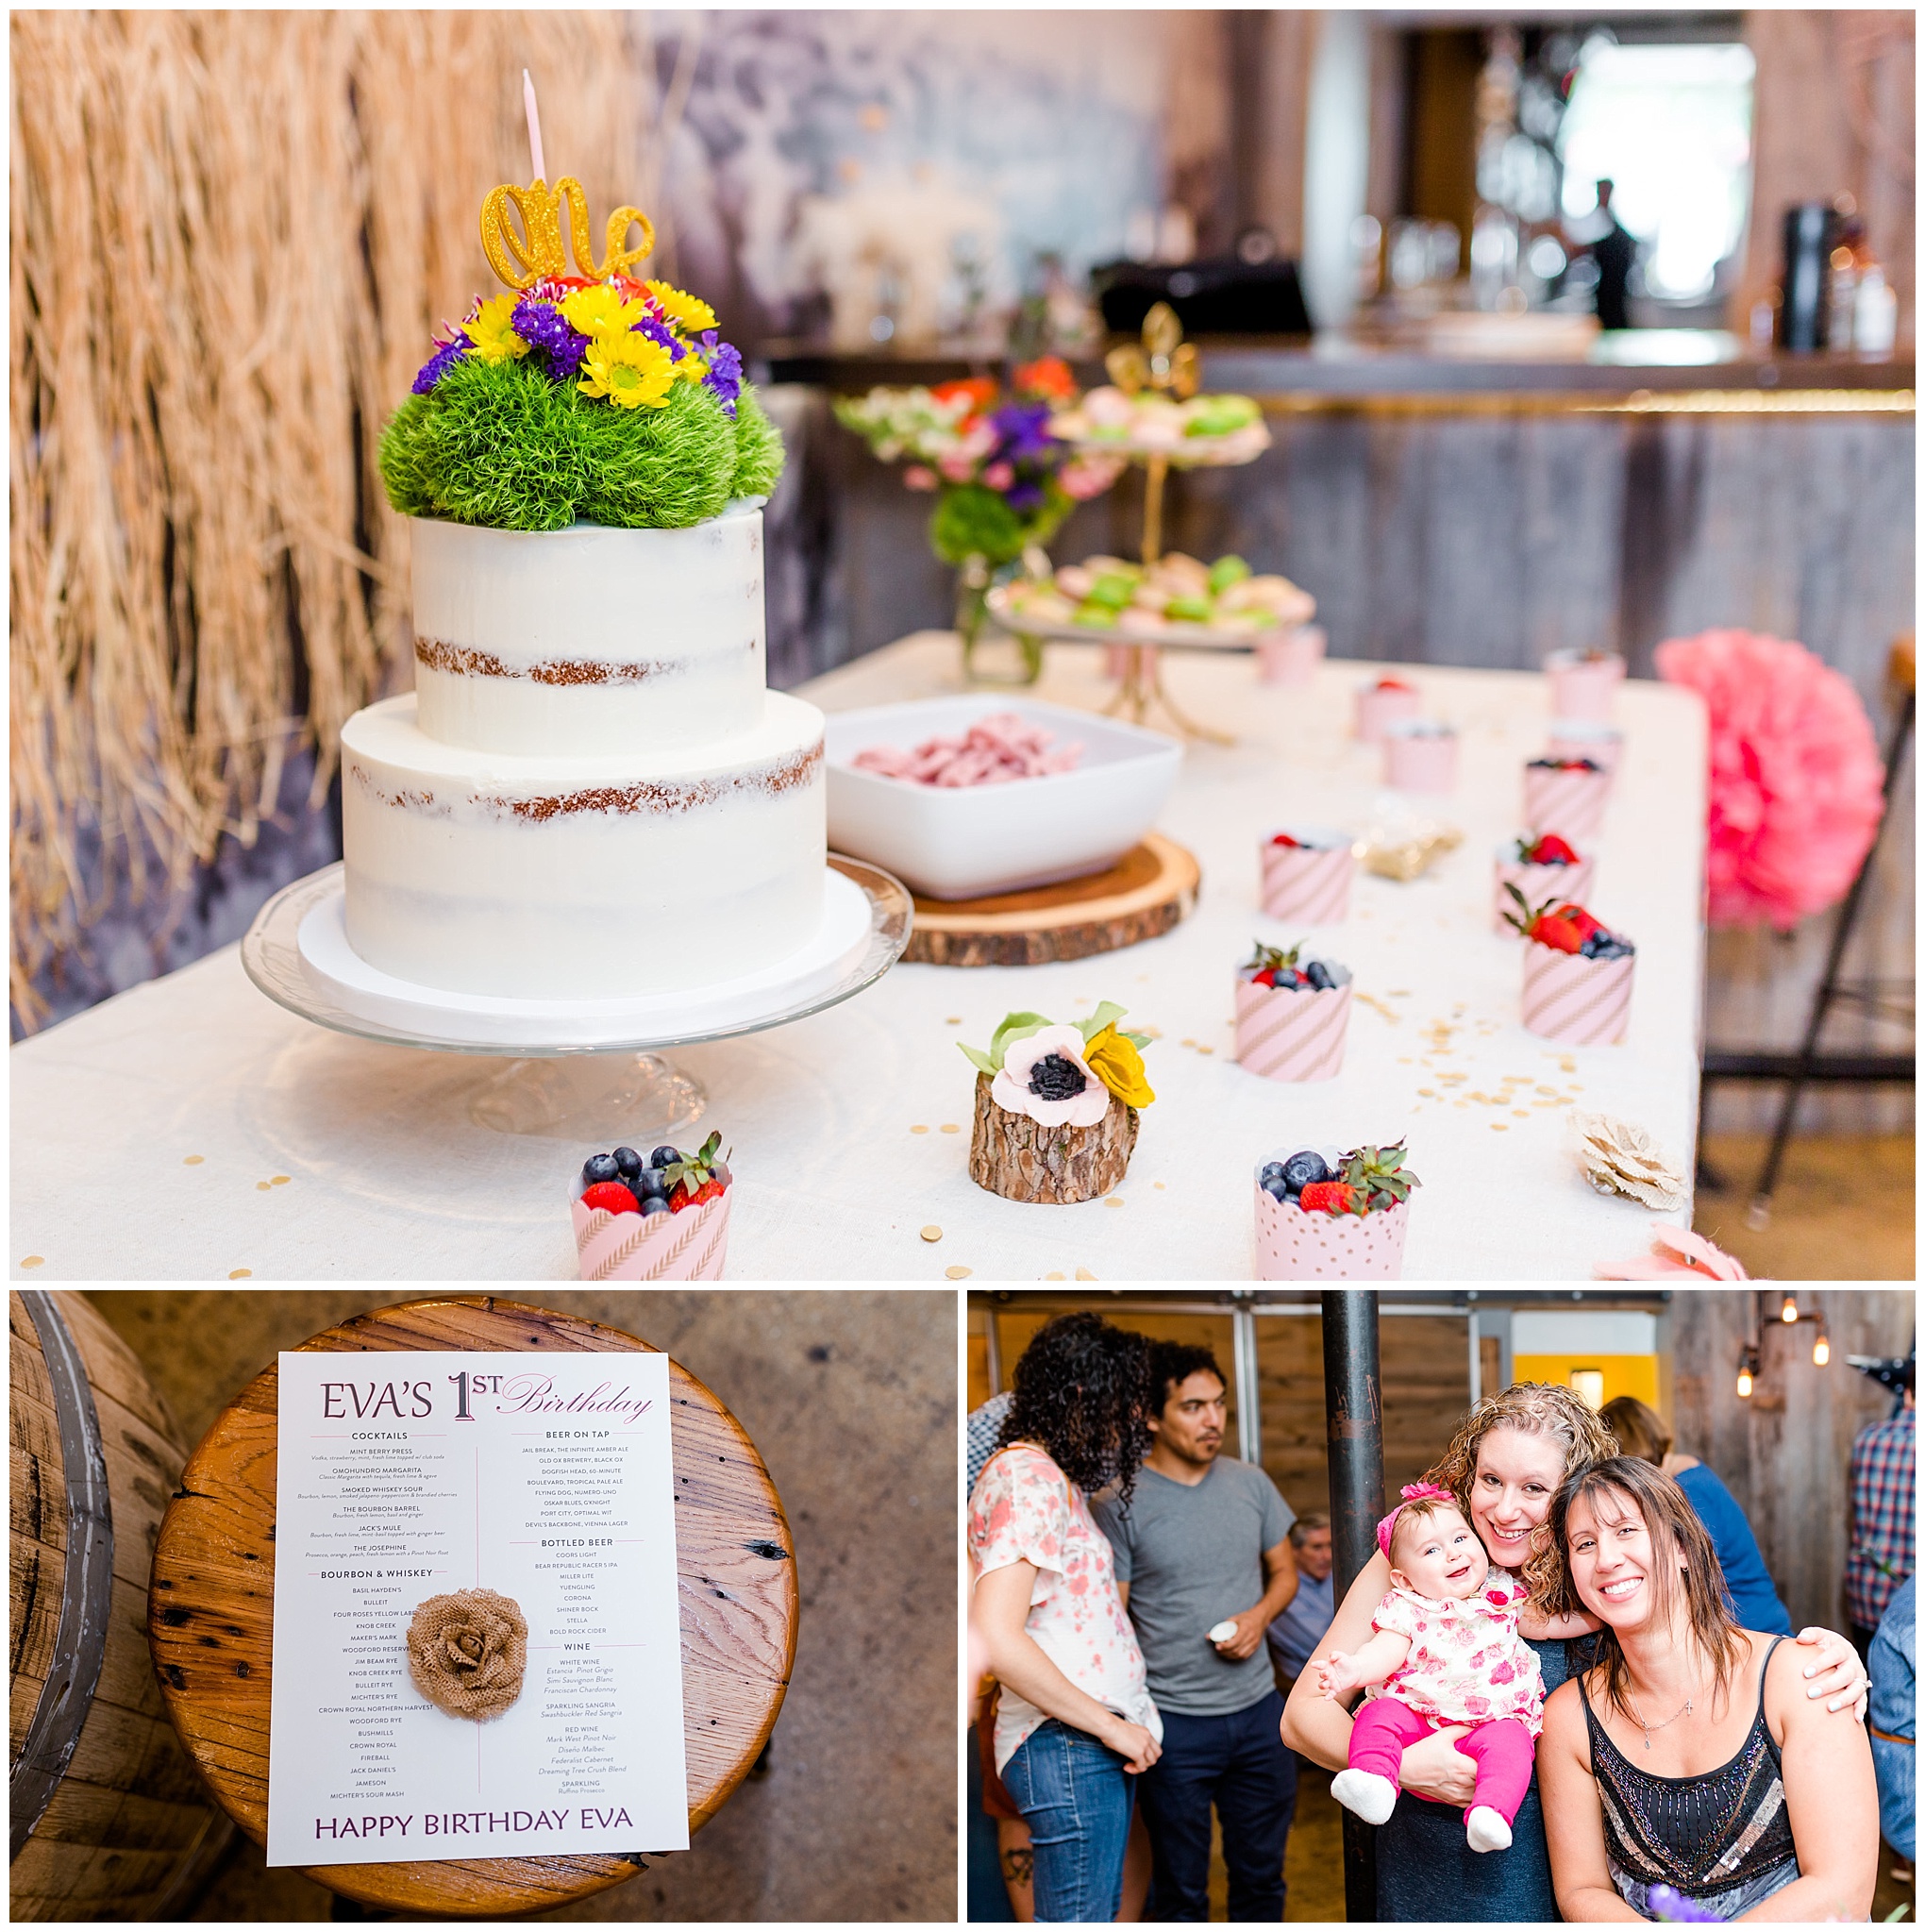 Texas Jack's party, floral arrangement, wildflowers, baby girl, father daughter, first birthday, birthday party, Arlington event photographer, Arlington event, paper flowers, rustic birthday cake, customized menu, personalized menu, group photos